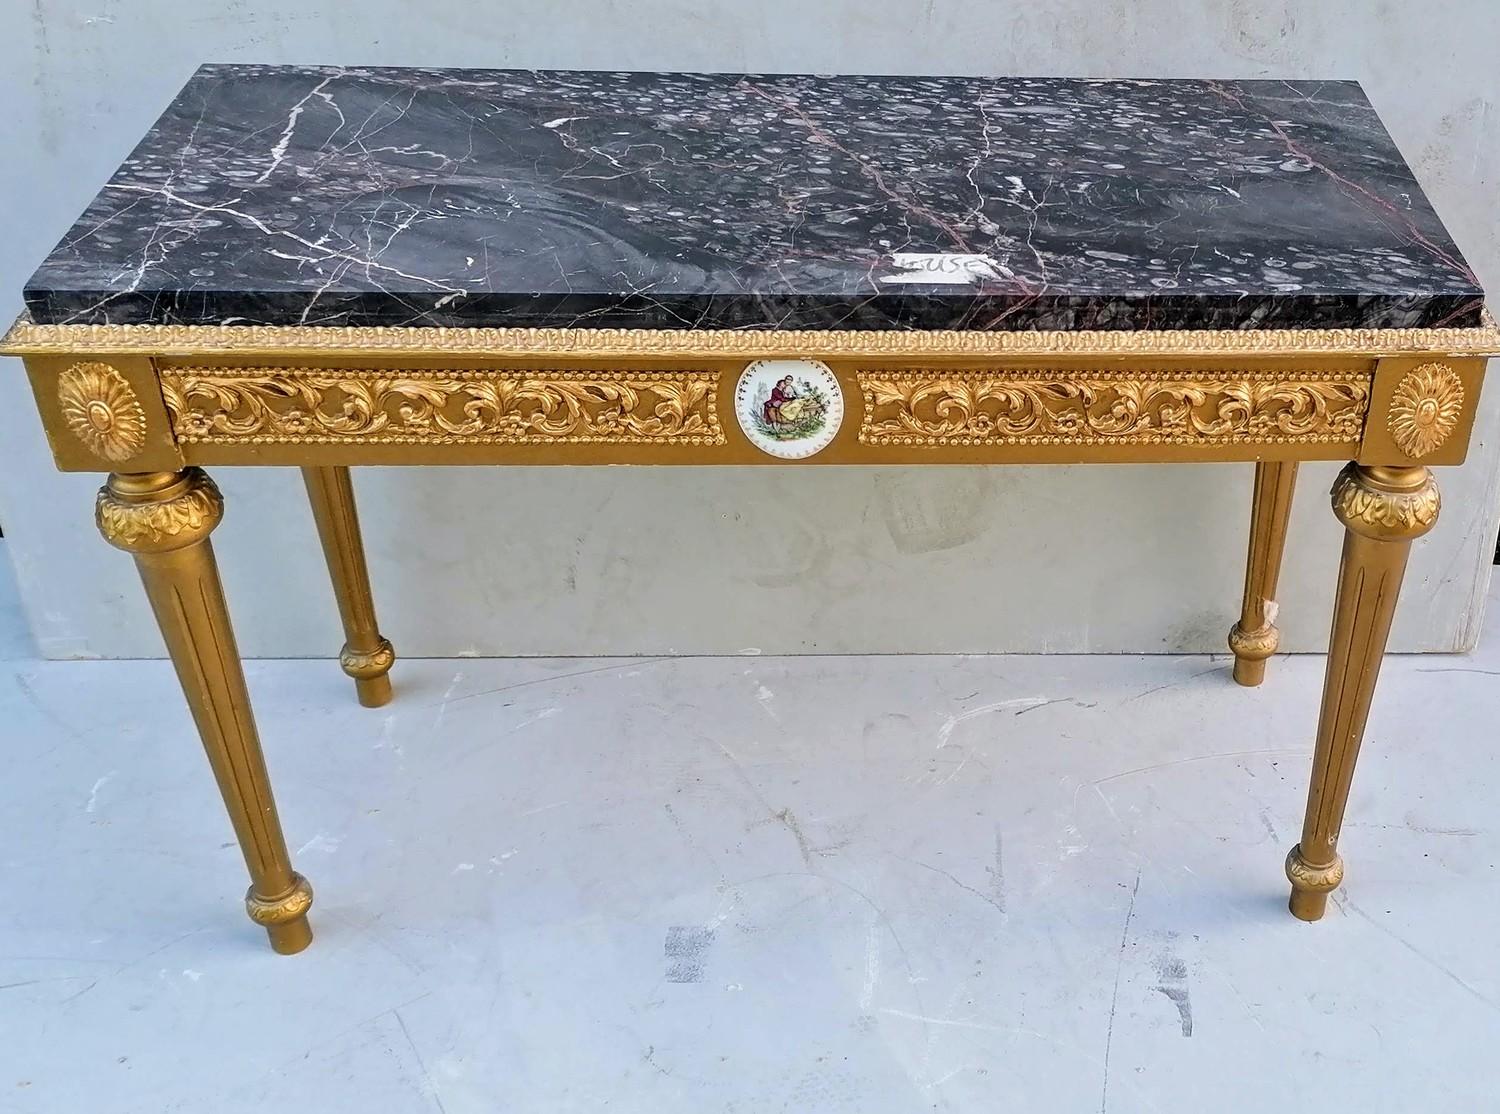 A Louis XV-style side or centre table with veined marble oblong top, gilt frieze with scroll - Image 2 of 2